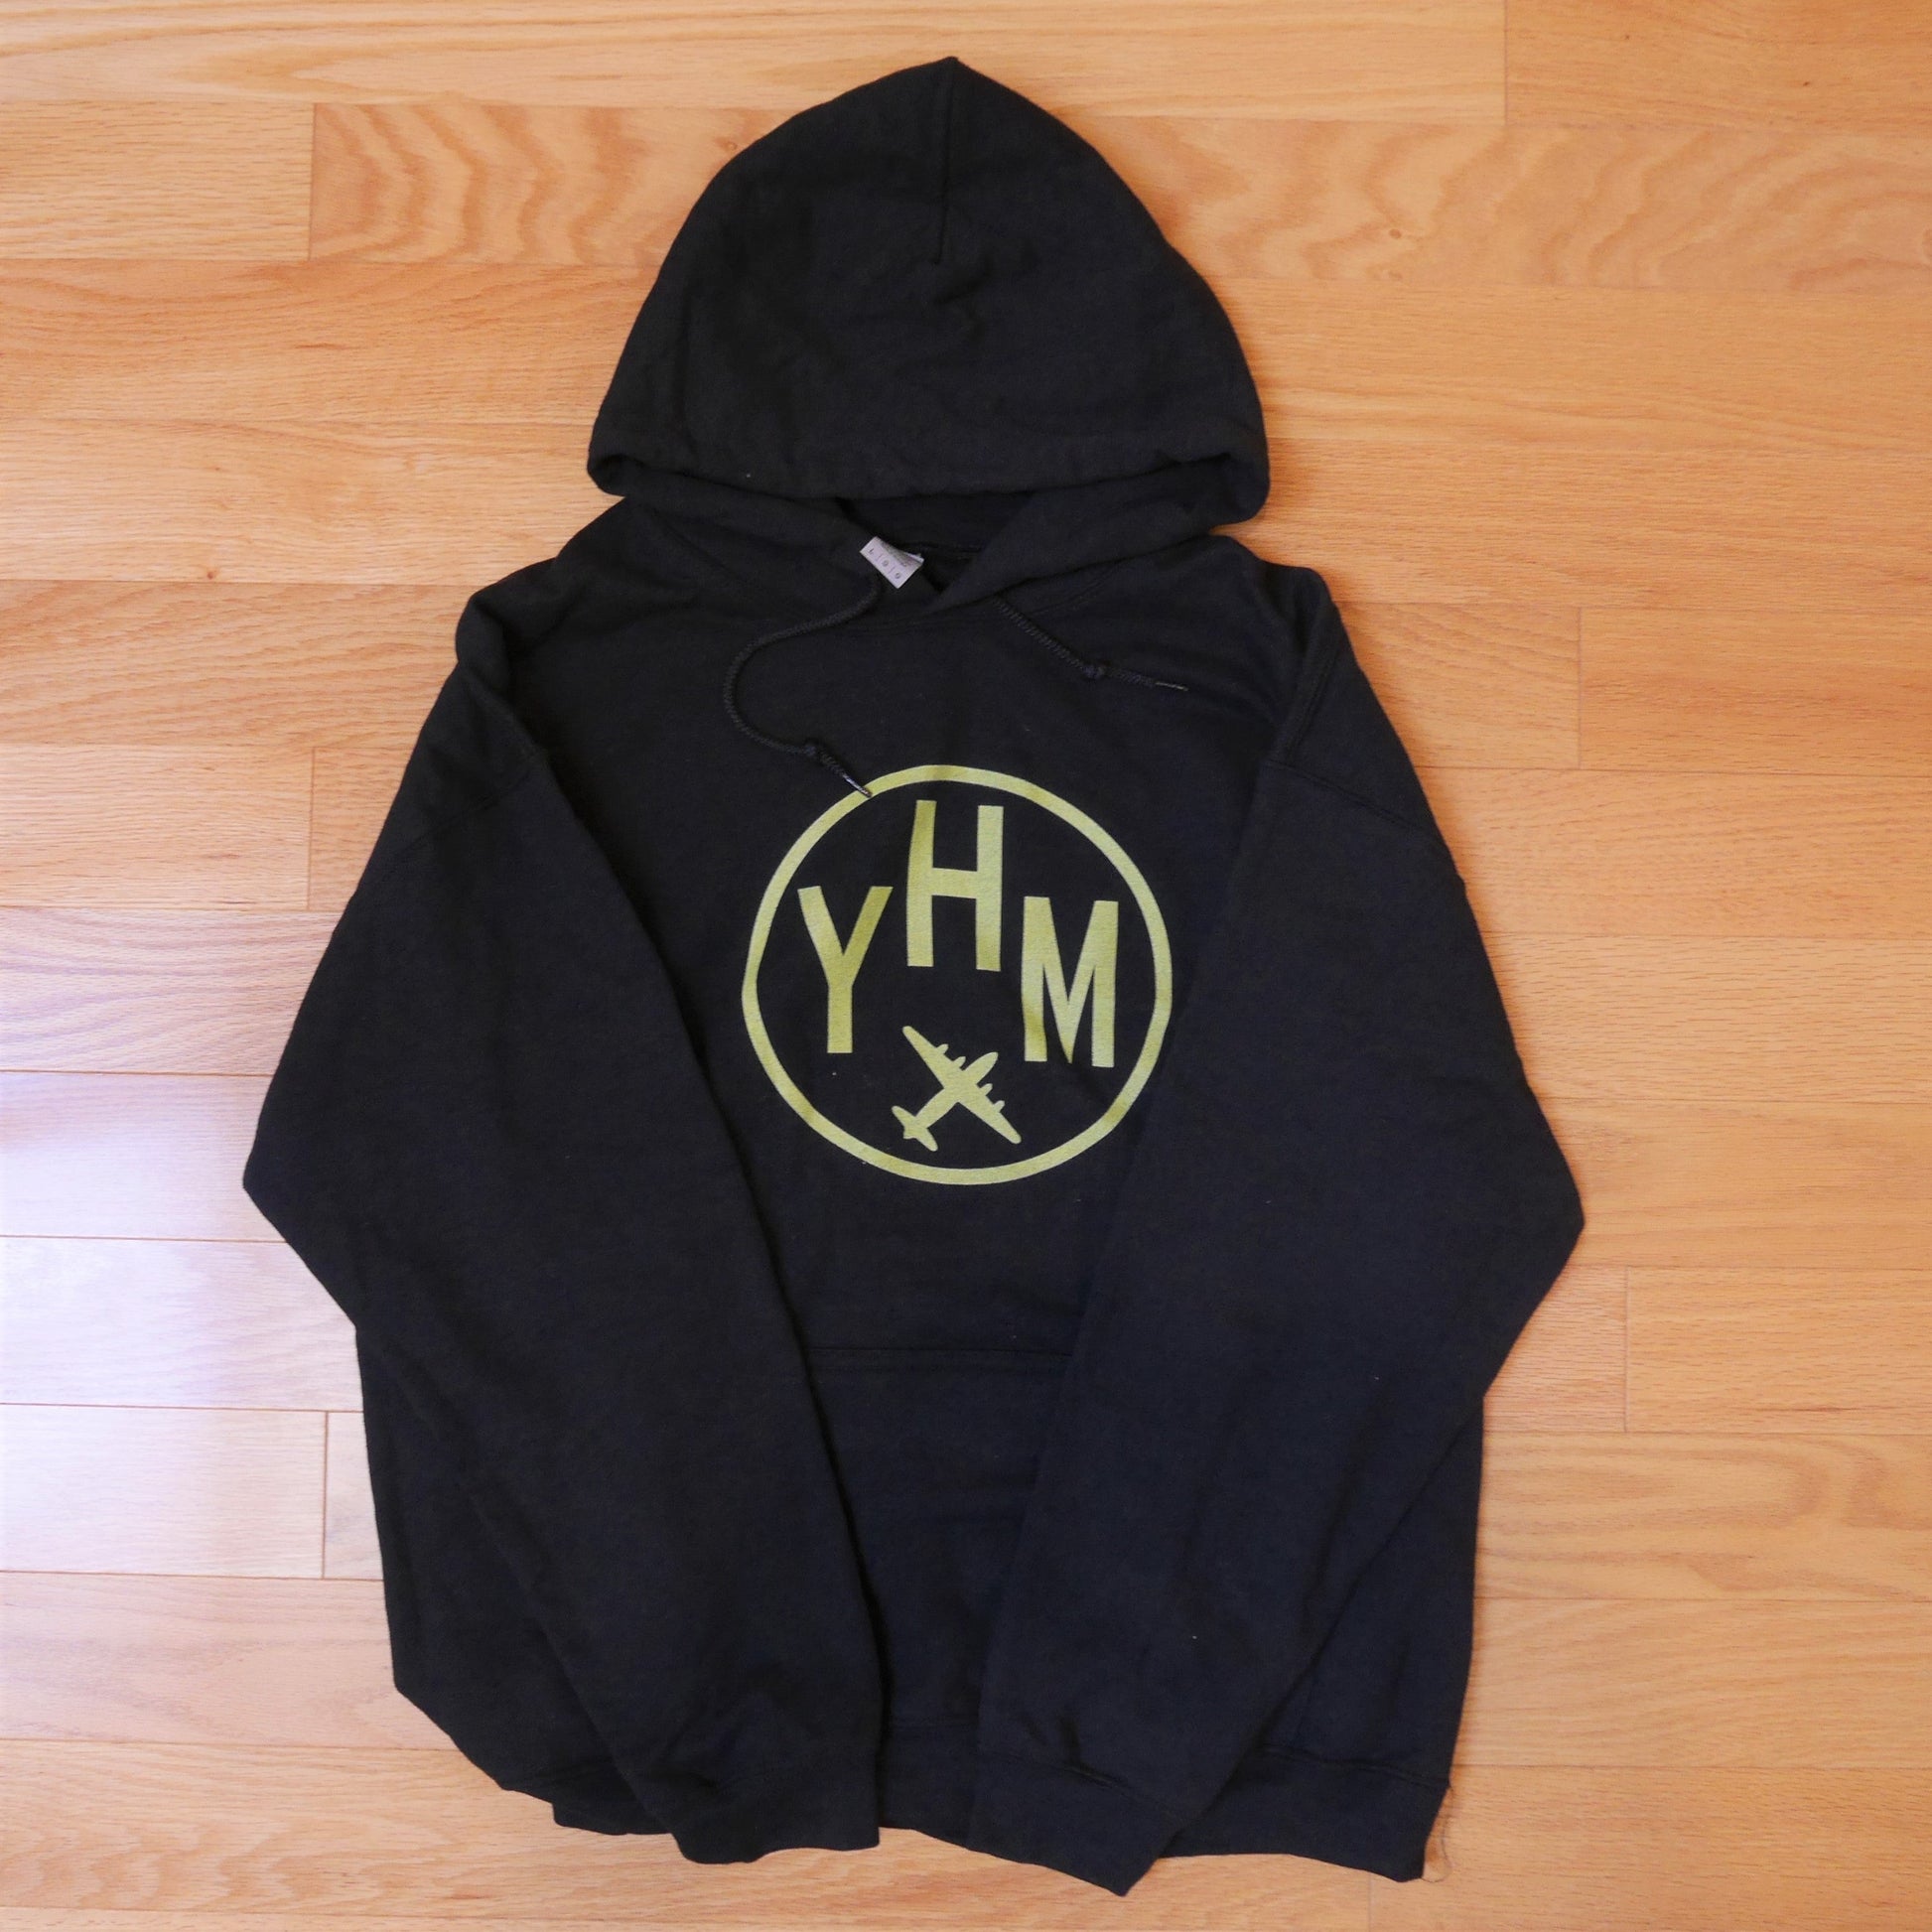 YHM Designs - CMH Columbus Airport Code Unisex Hoodie - Crossed-X Design with Vintage Aircraft - Image 10